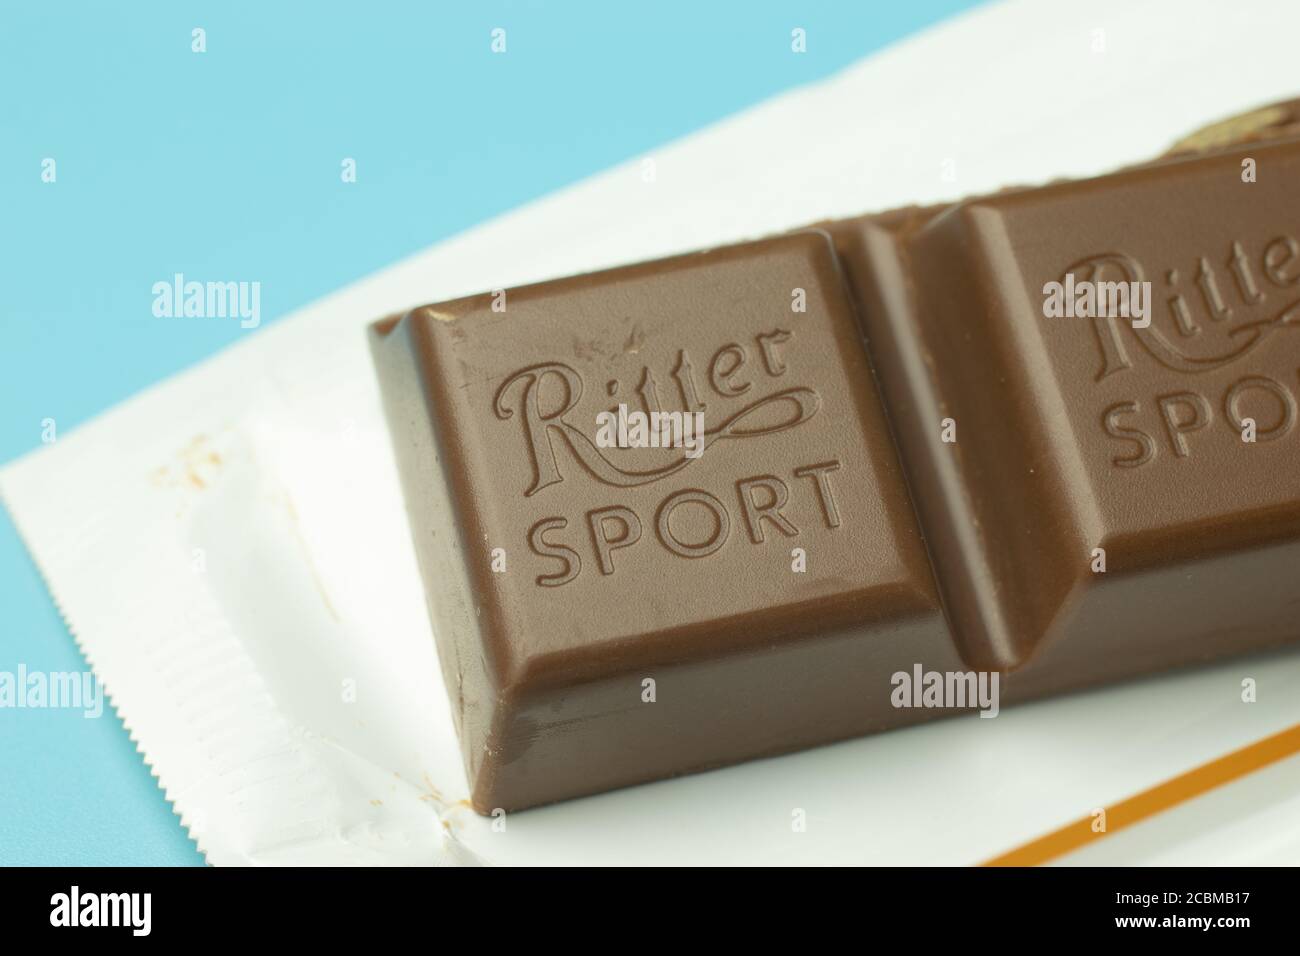 Moscow, Russia - 1 June 2020: Ritter Sport chocolate with logo close-up, Illustrative Editorial. Stock Photo